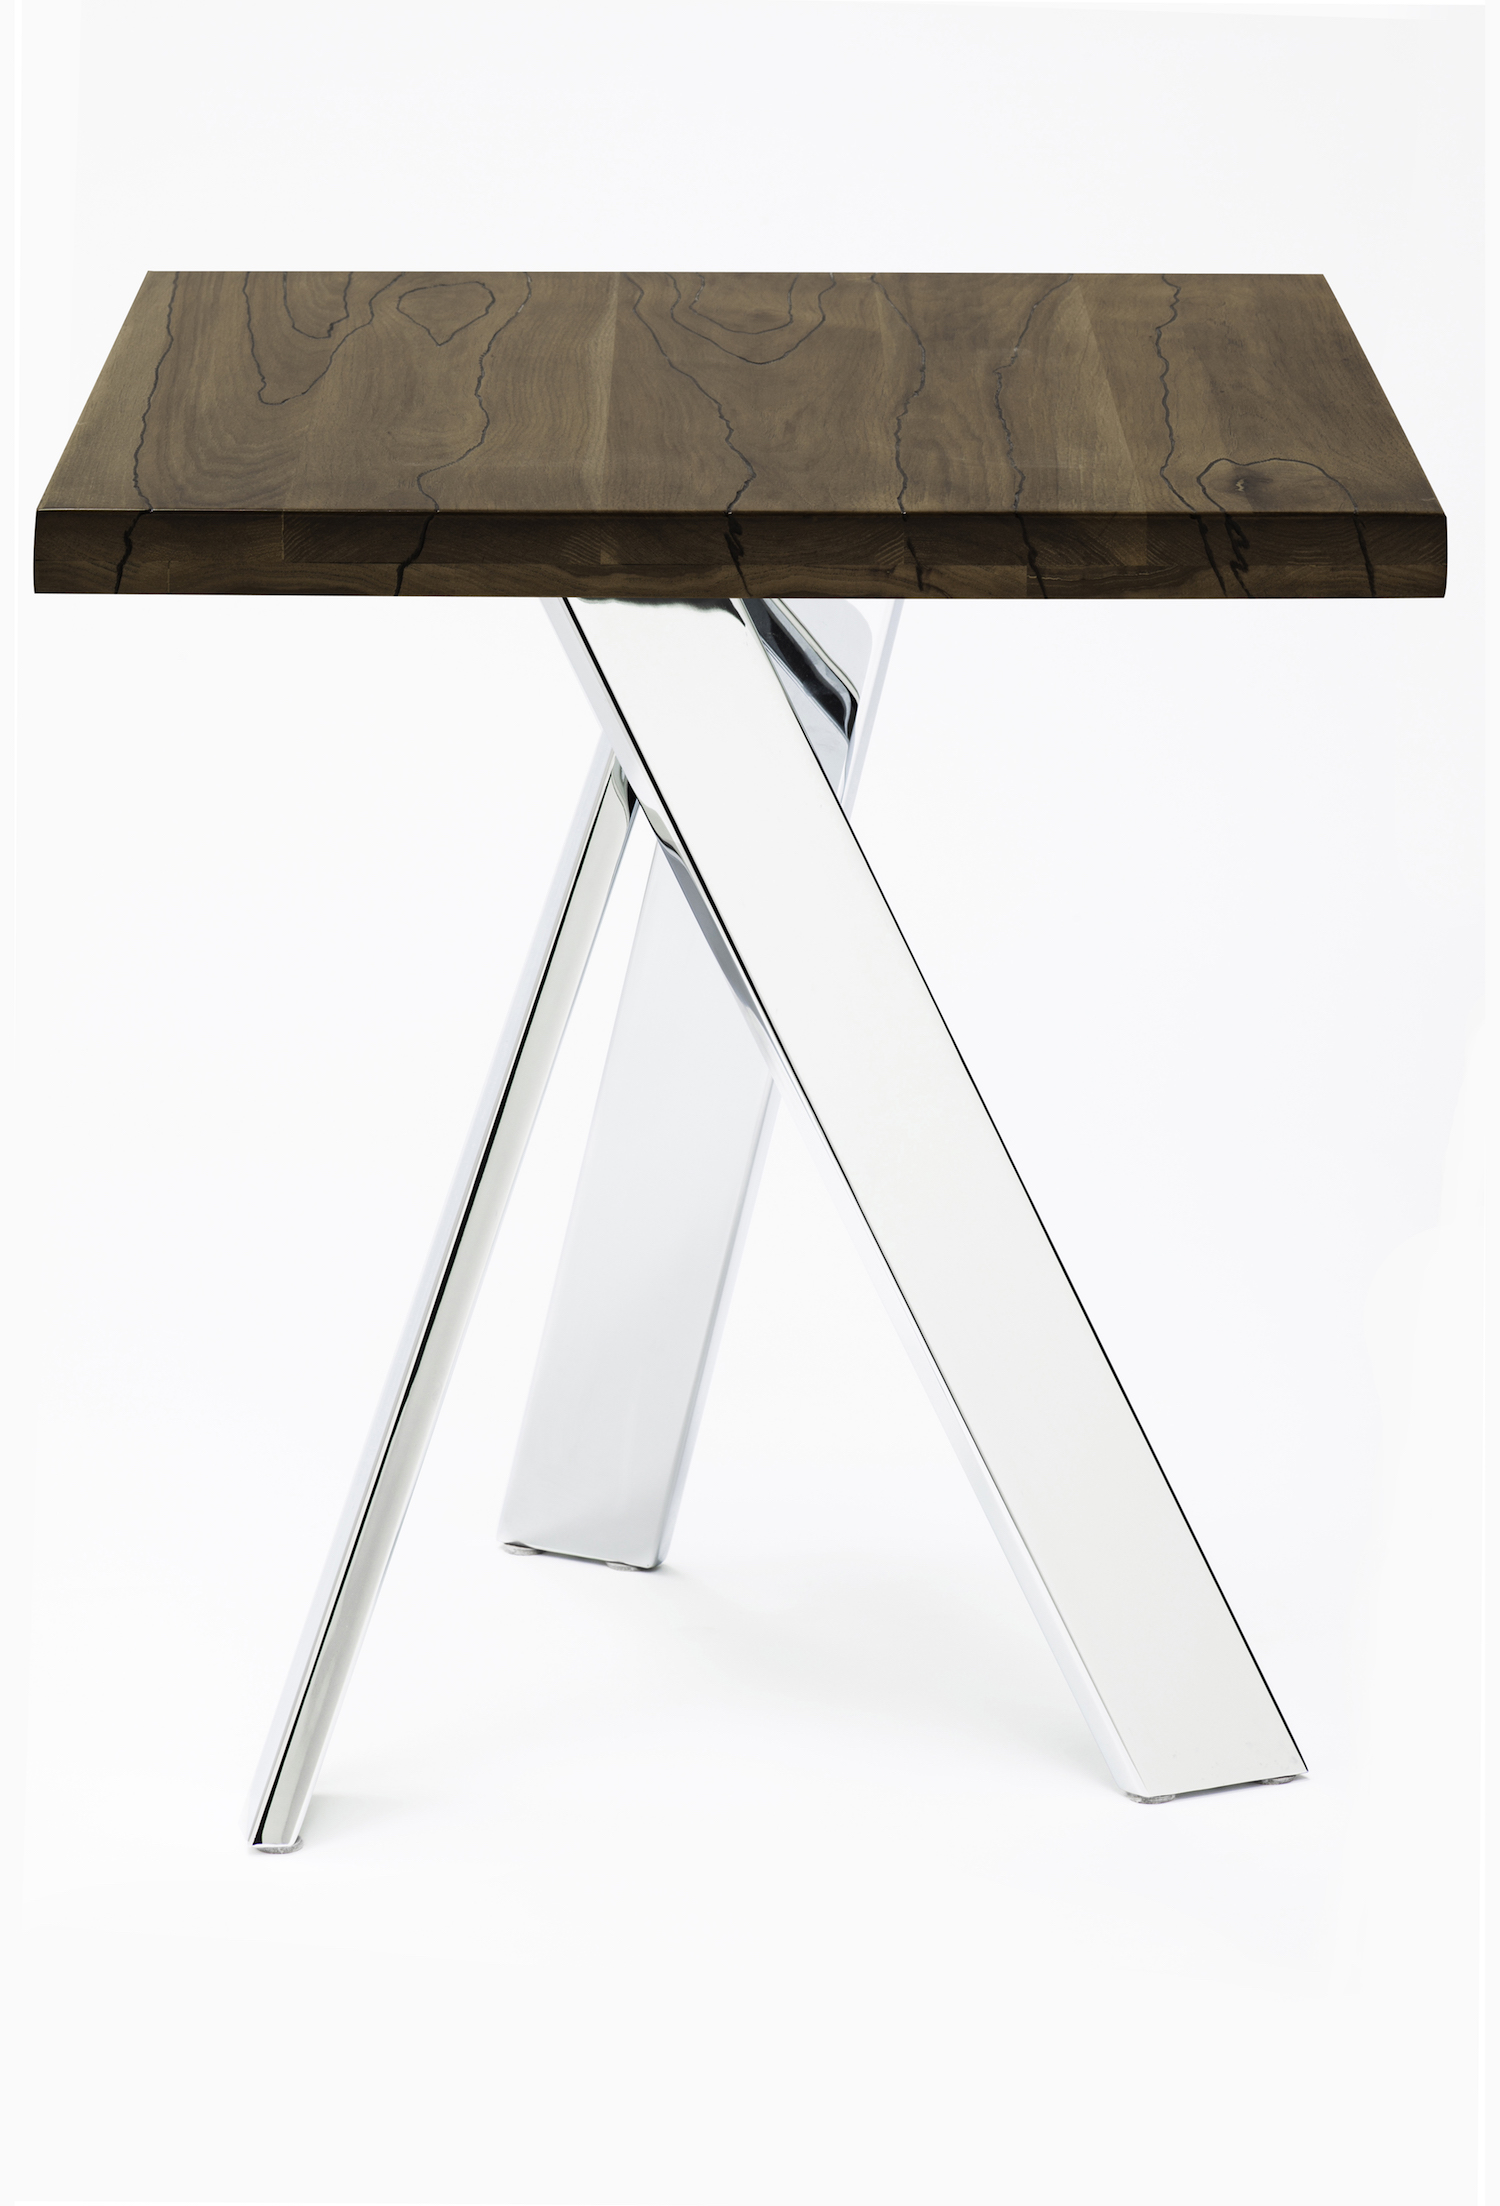 24" x 24" x 30" Dining/Restaurant Table<br>Solid Hickory with Chrome Plated Base